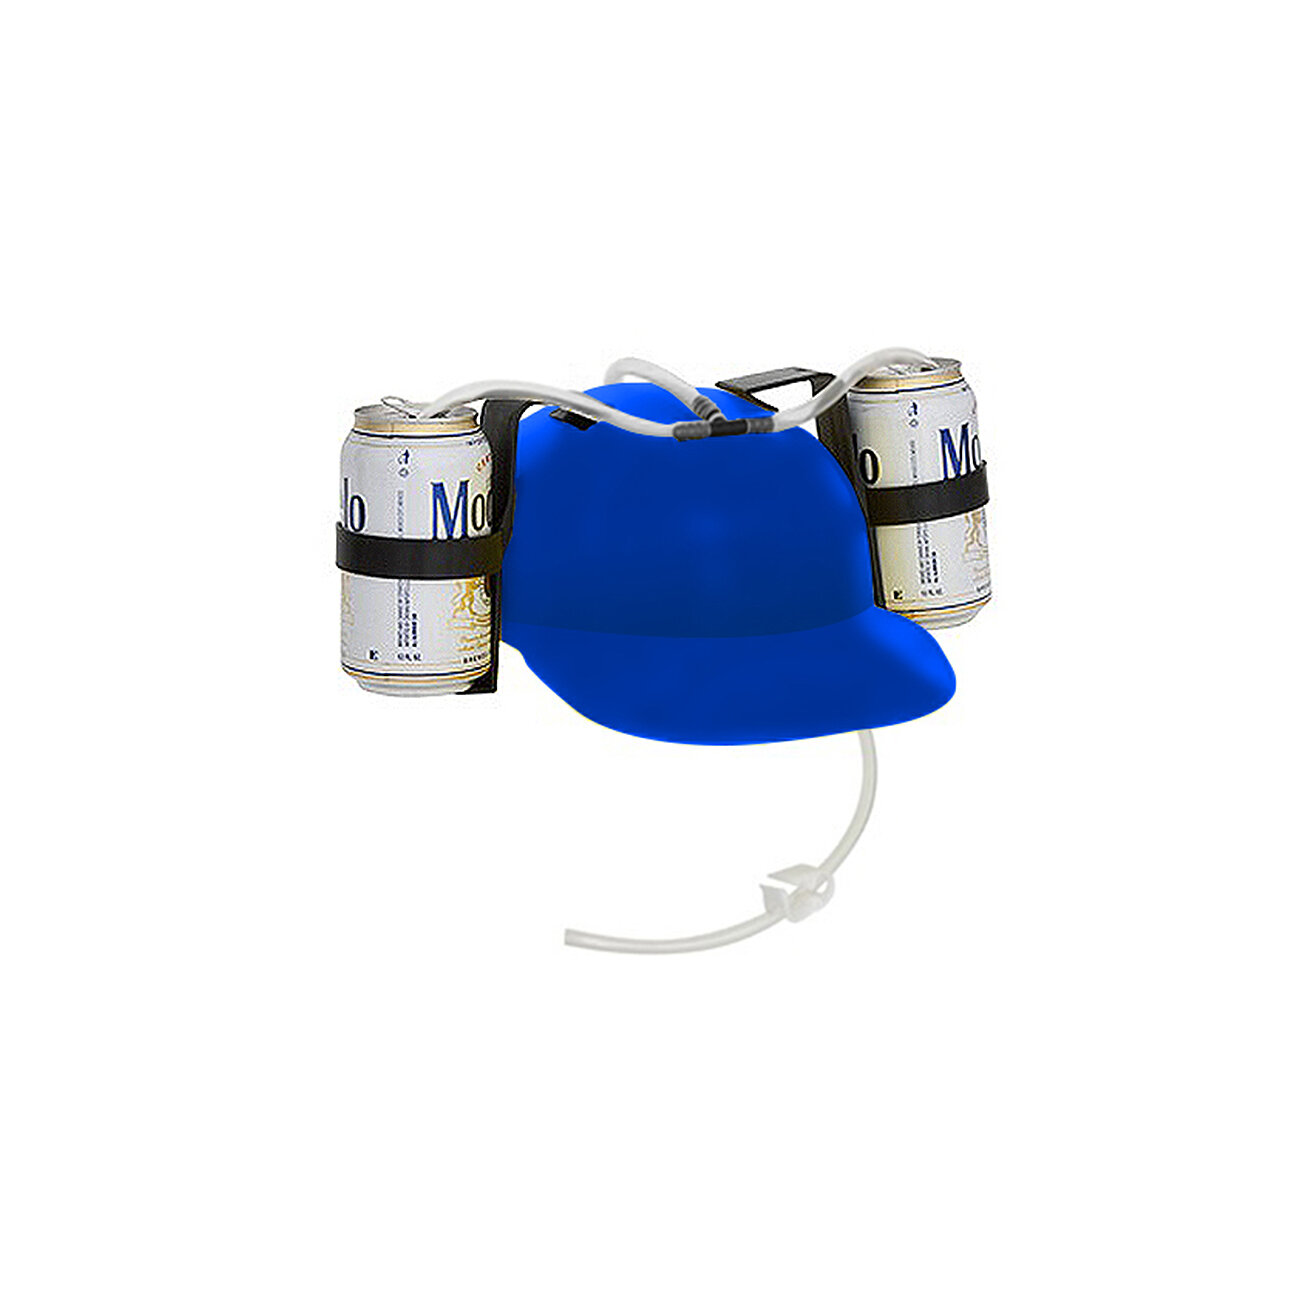 BBQ’s Carnivals Hands Free Drinking Tool for every Occasion or College School One Size Fits Most Fun Drink Guzzler for Parties Beer and Soda Drinking Hard Hat Helmet